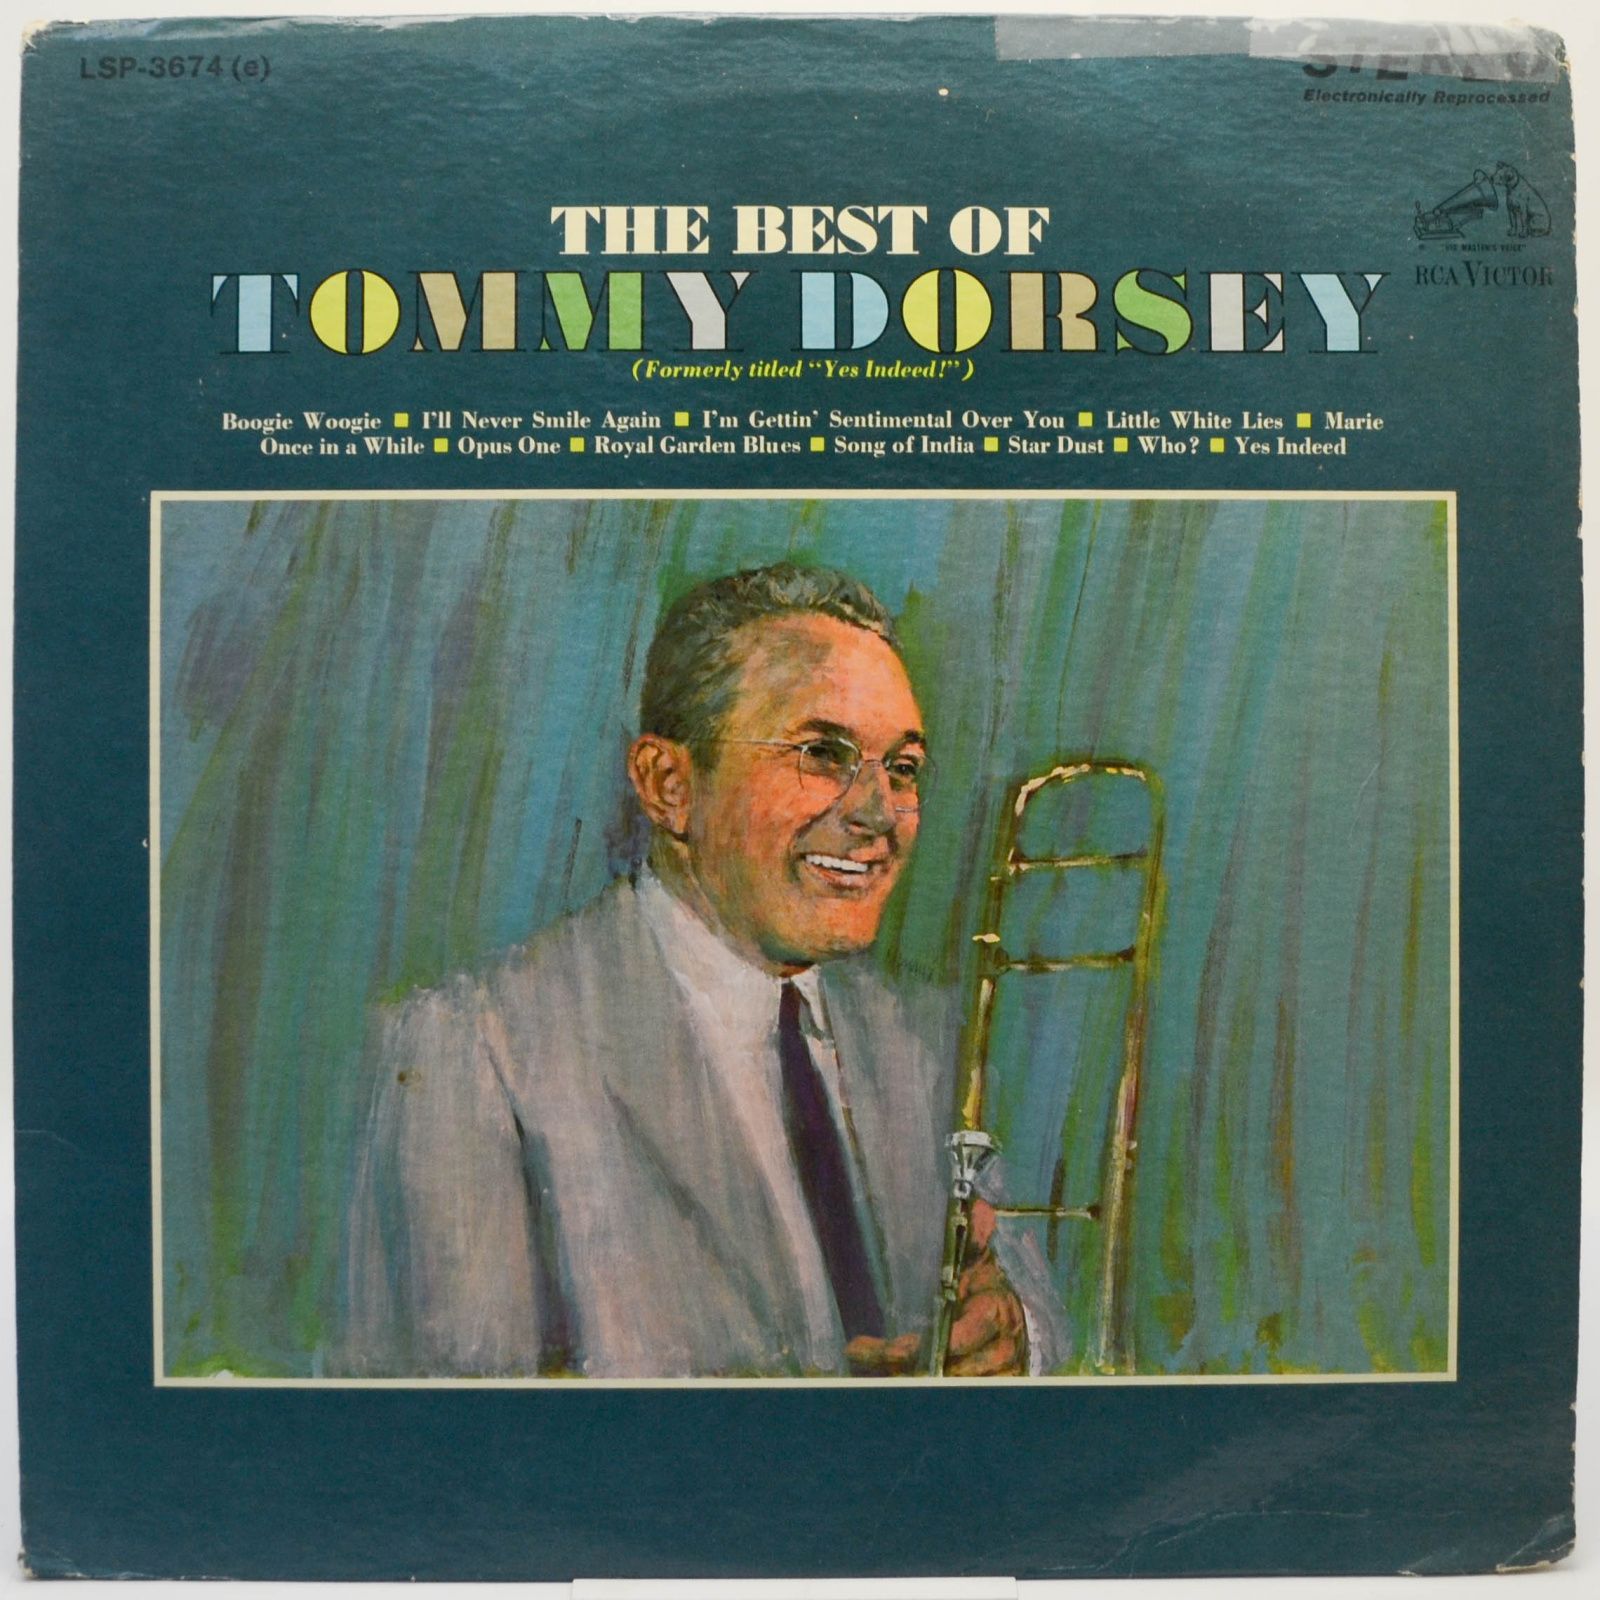 The Best Of Tommy Dorsey, 1967